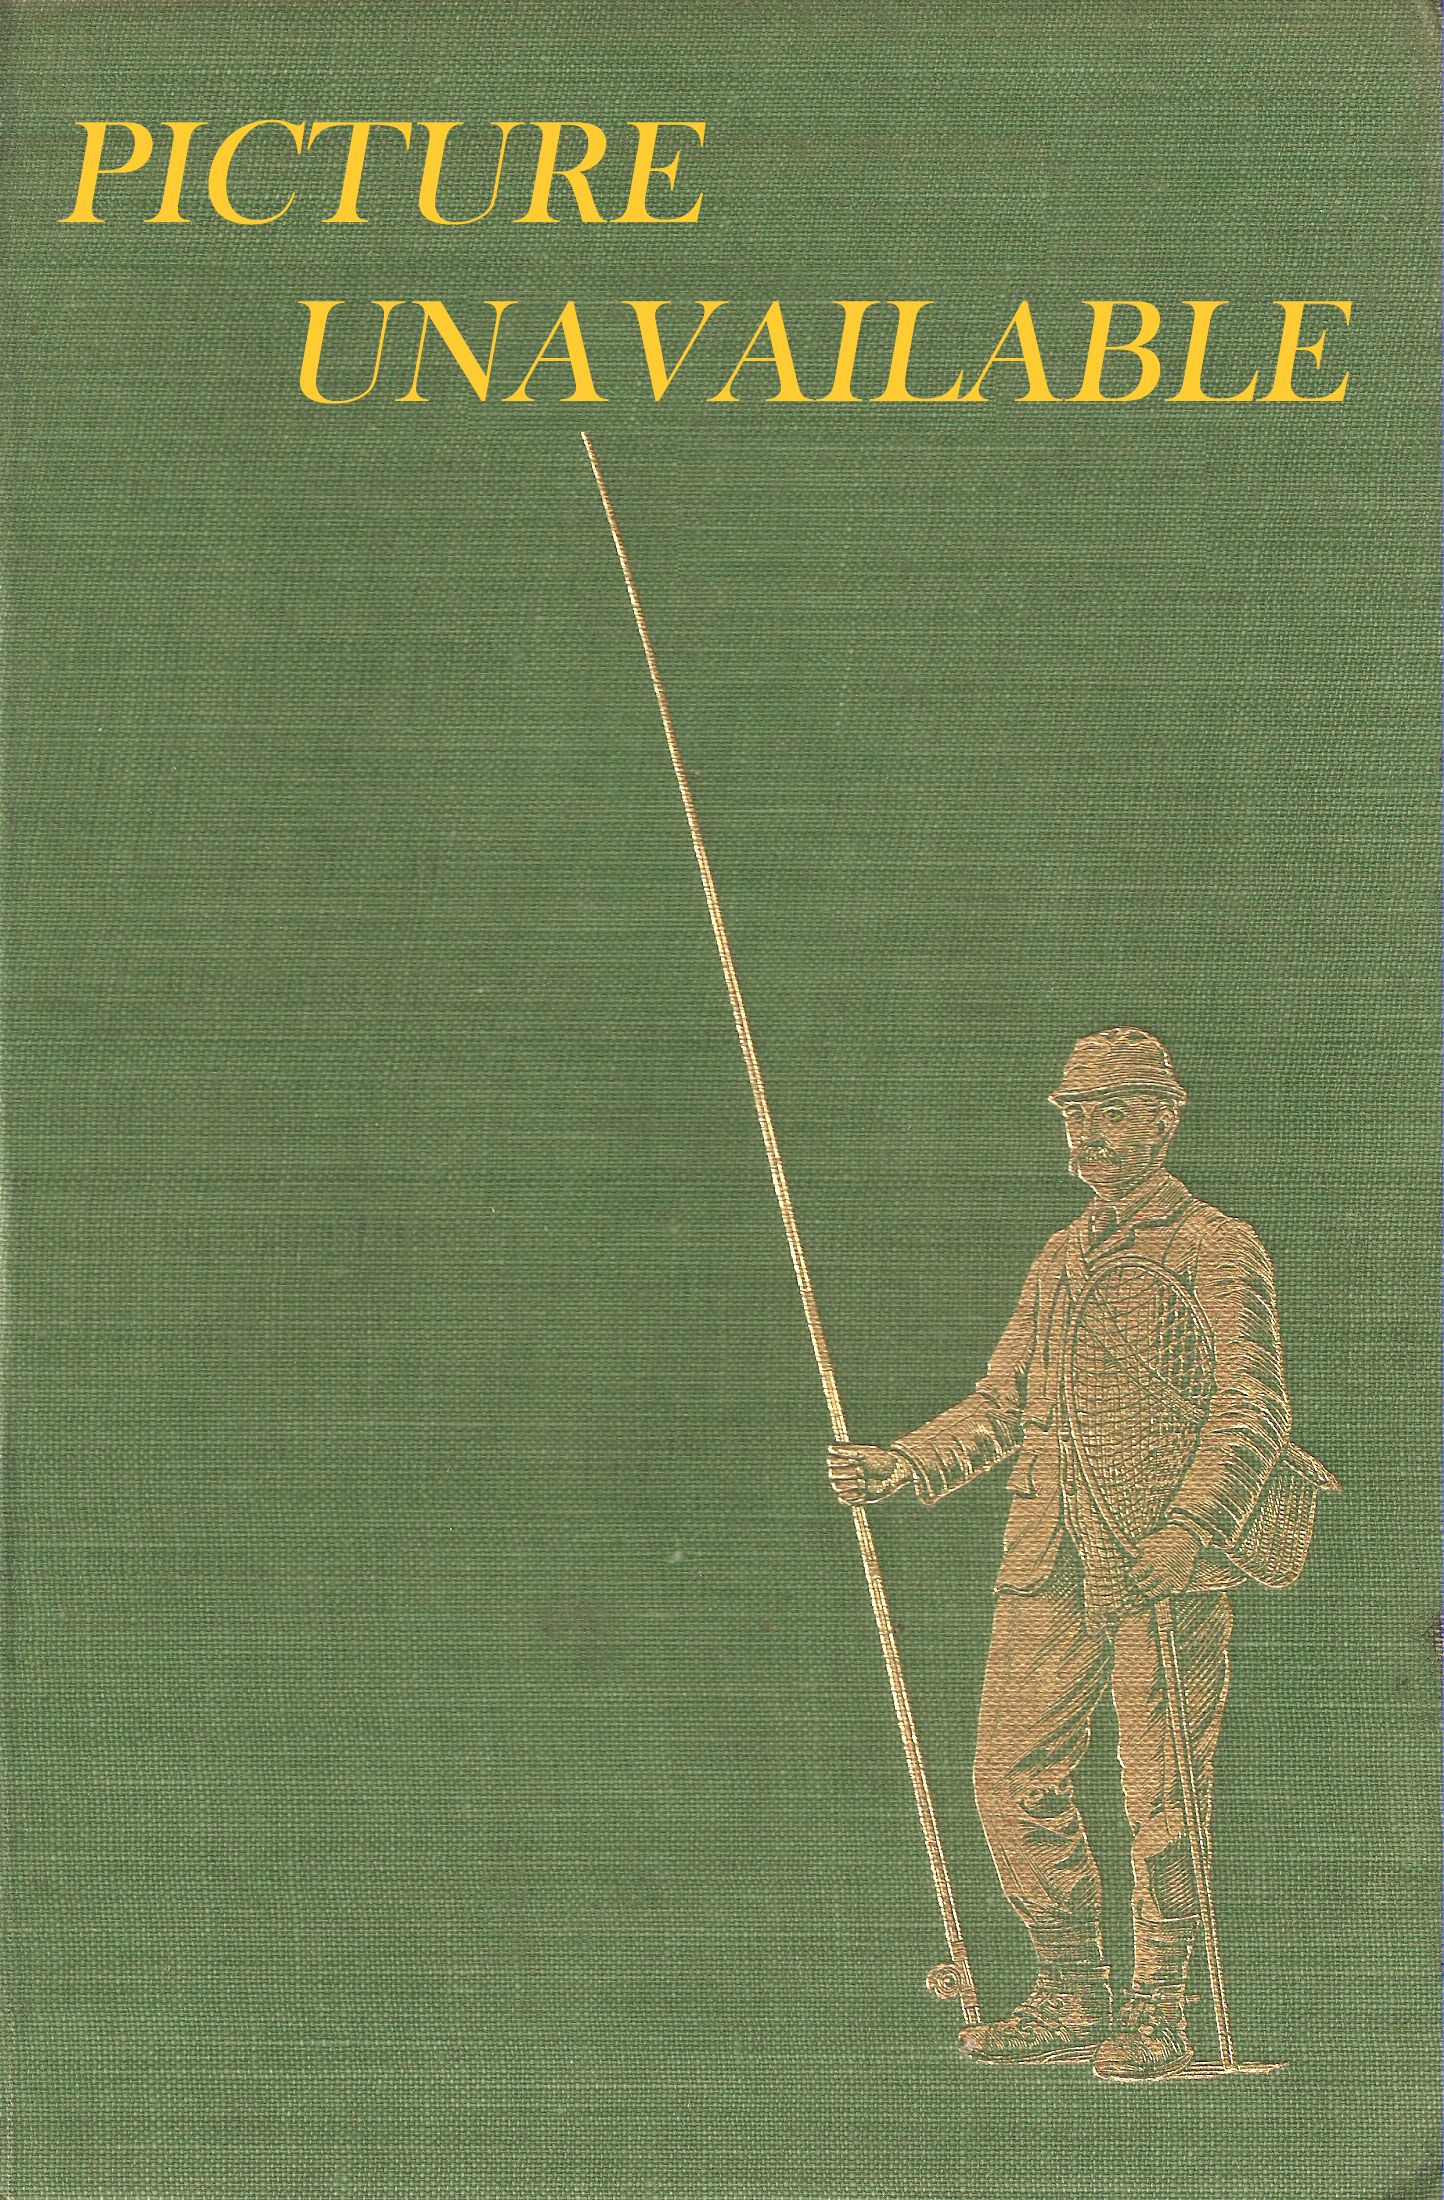 FISHING IN THE FOOTSTEPS OF MR. CRABTREE. By John Bailey with  illustrations by Robert Olsen. The Collector's Edition.